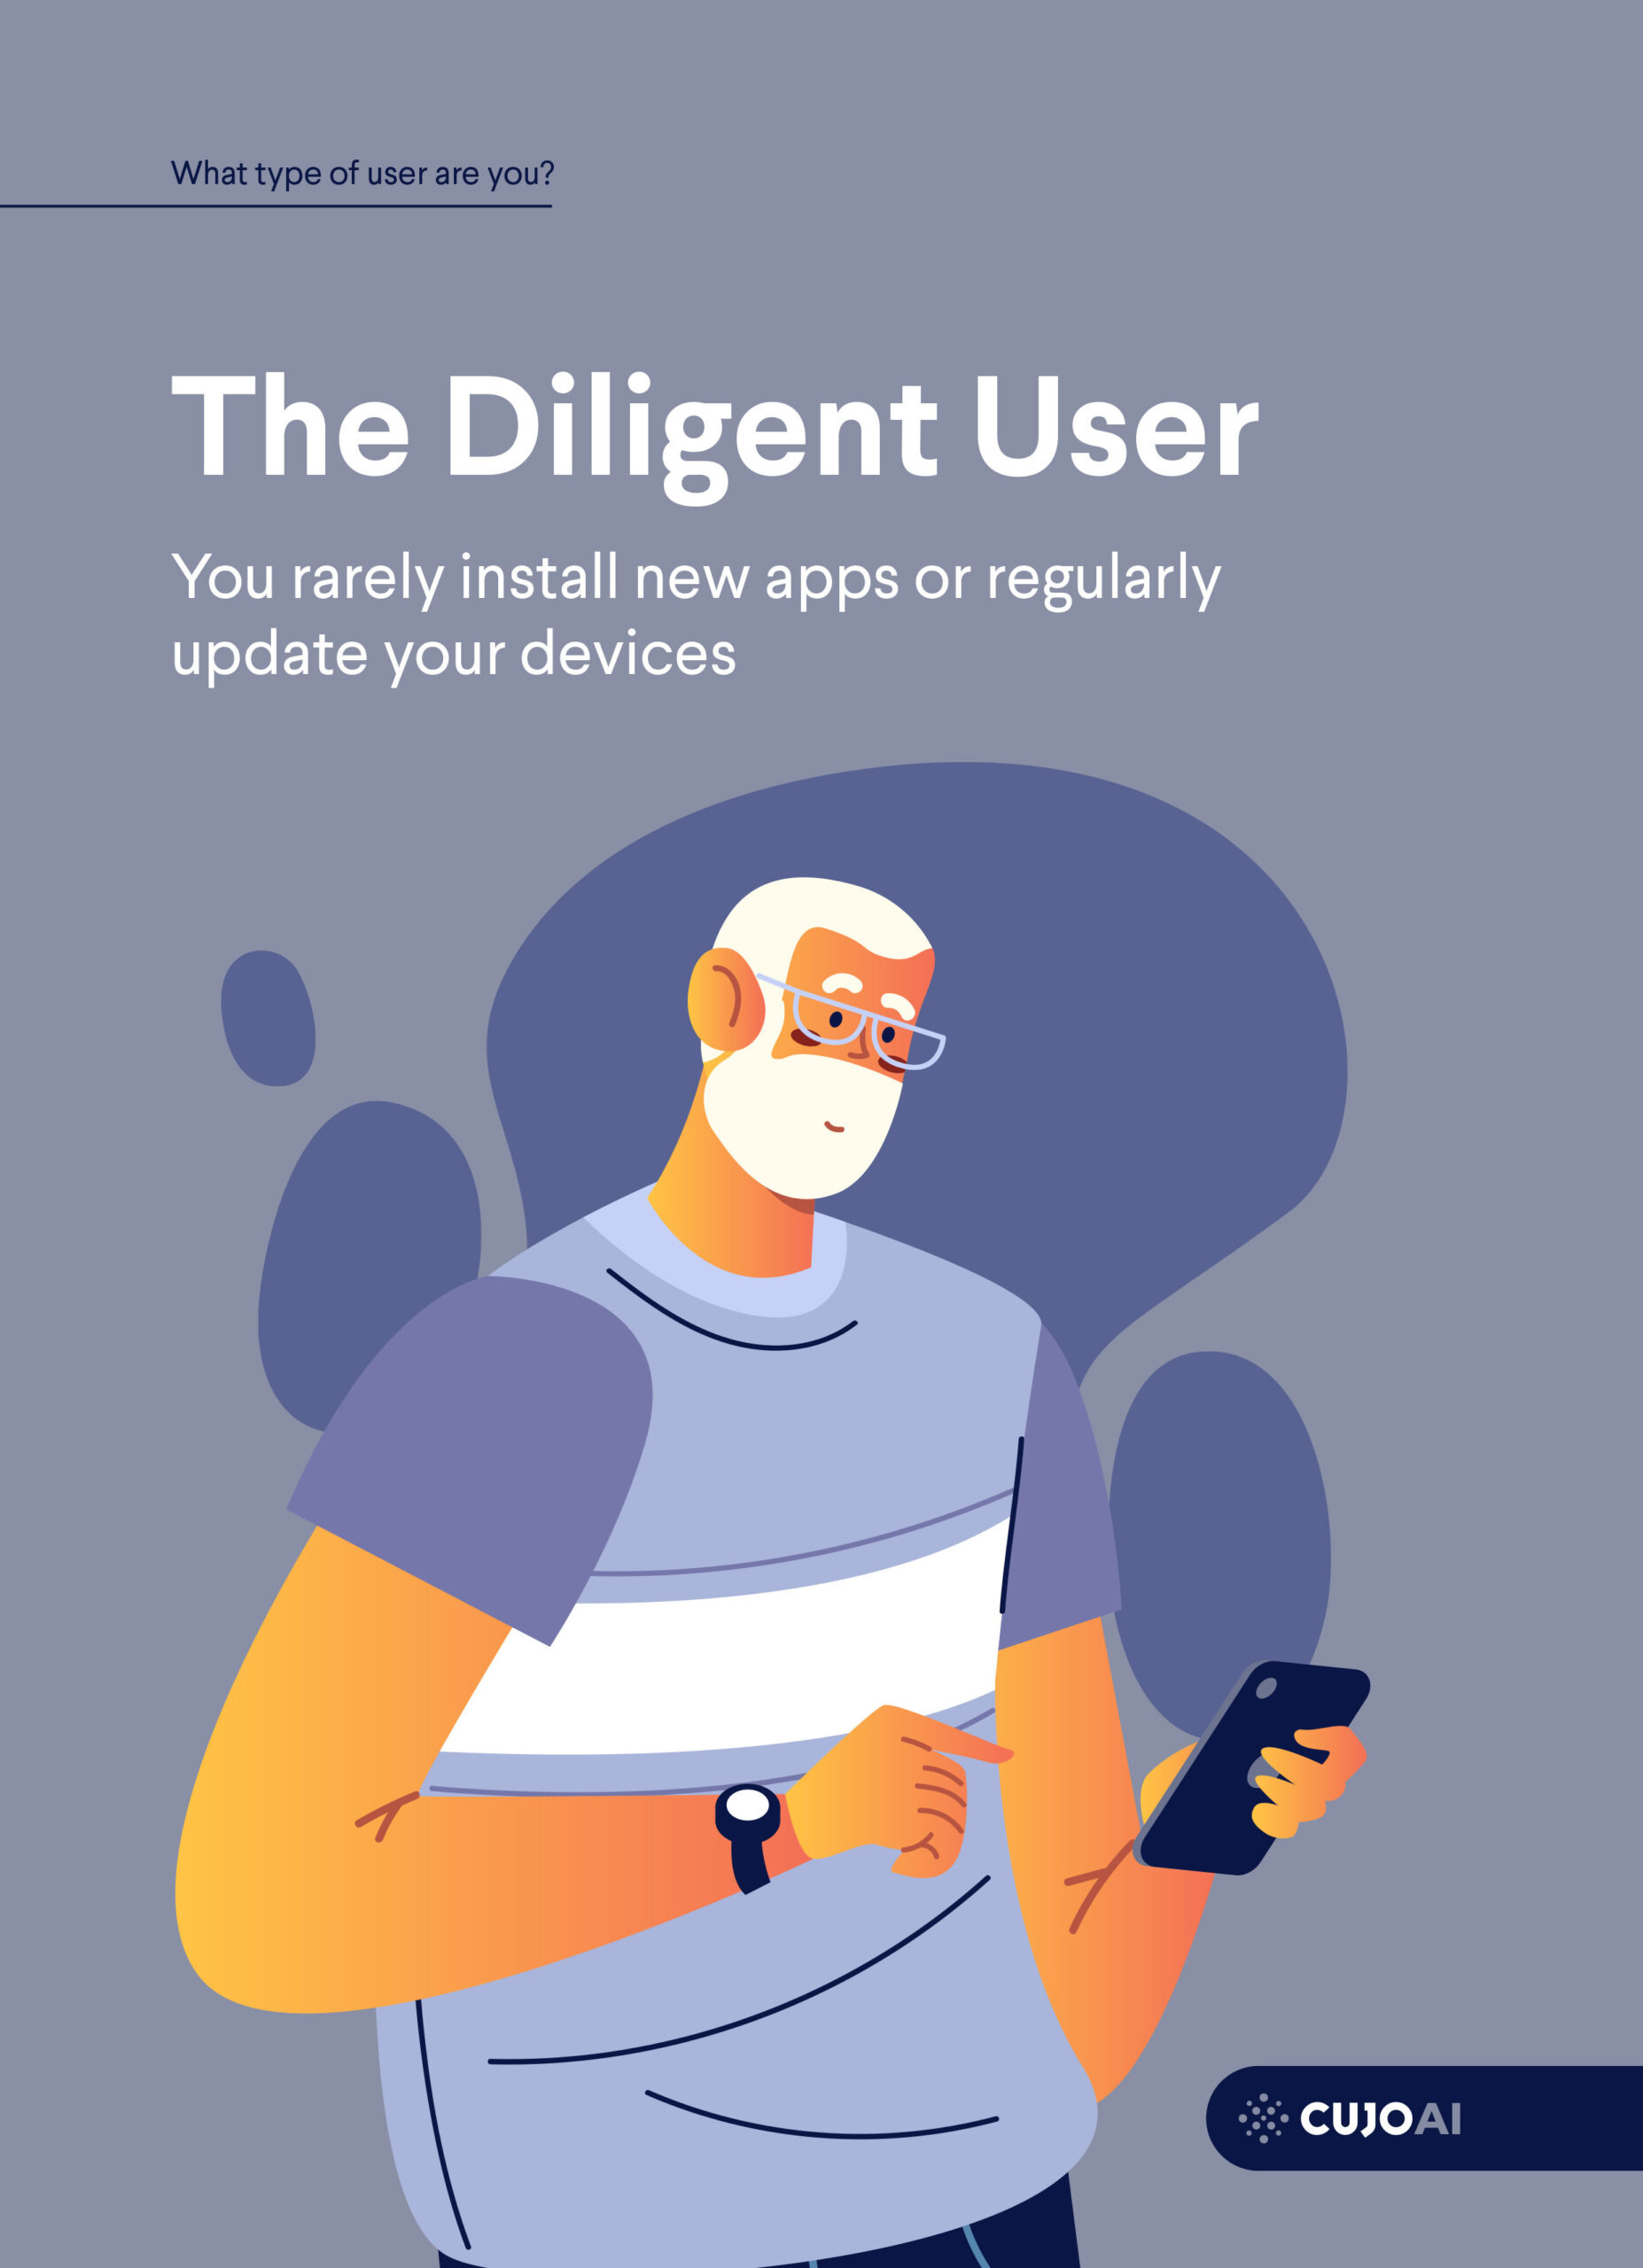 The dilligent mobile user